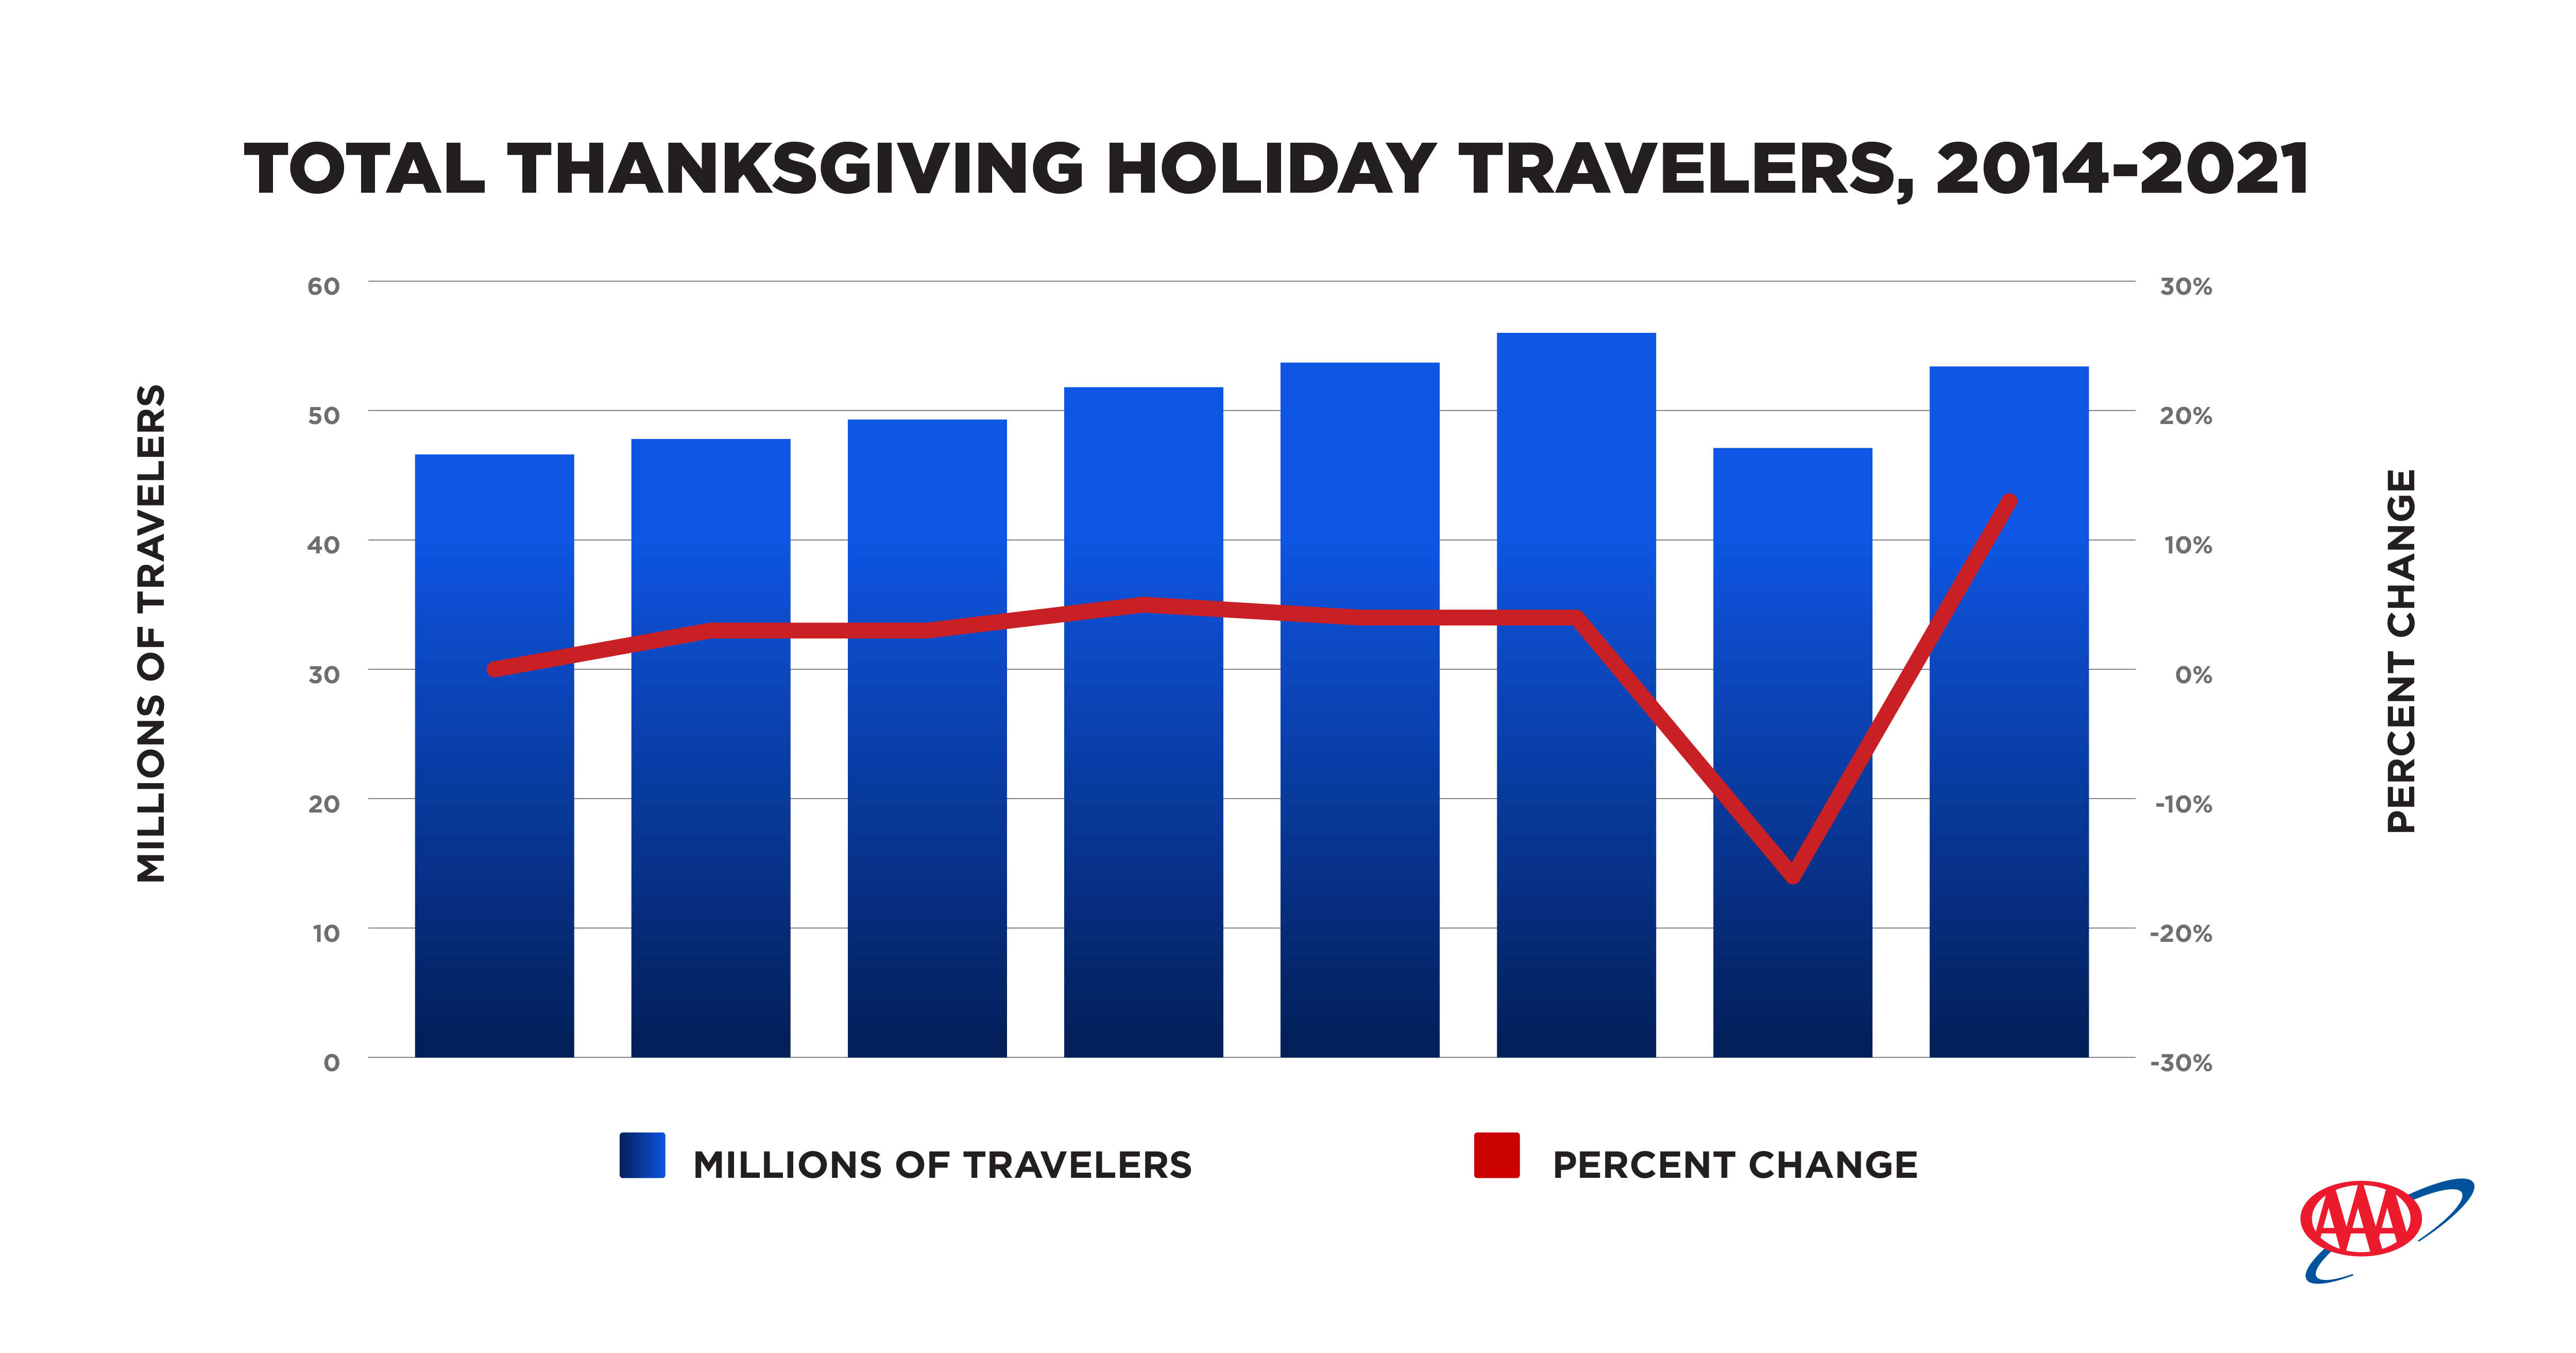 AAA Thanksgiving Travel Forecast 2021